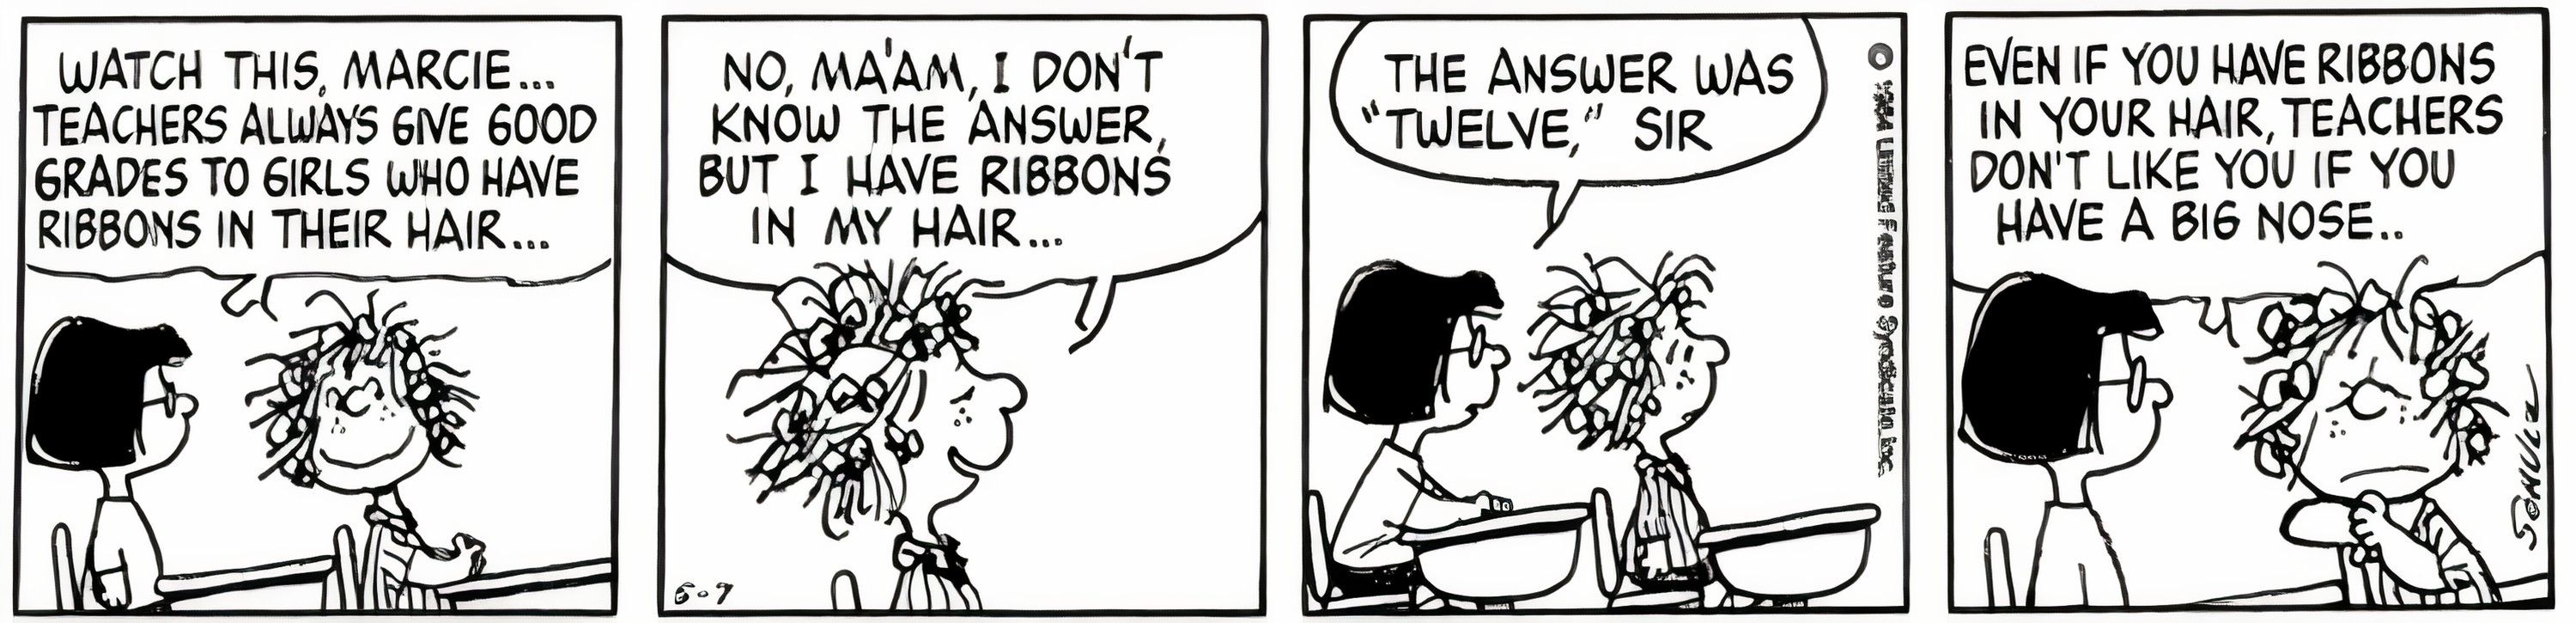 Peanuts, Patty puts bows in her hair to try to win favor with her teacher.